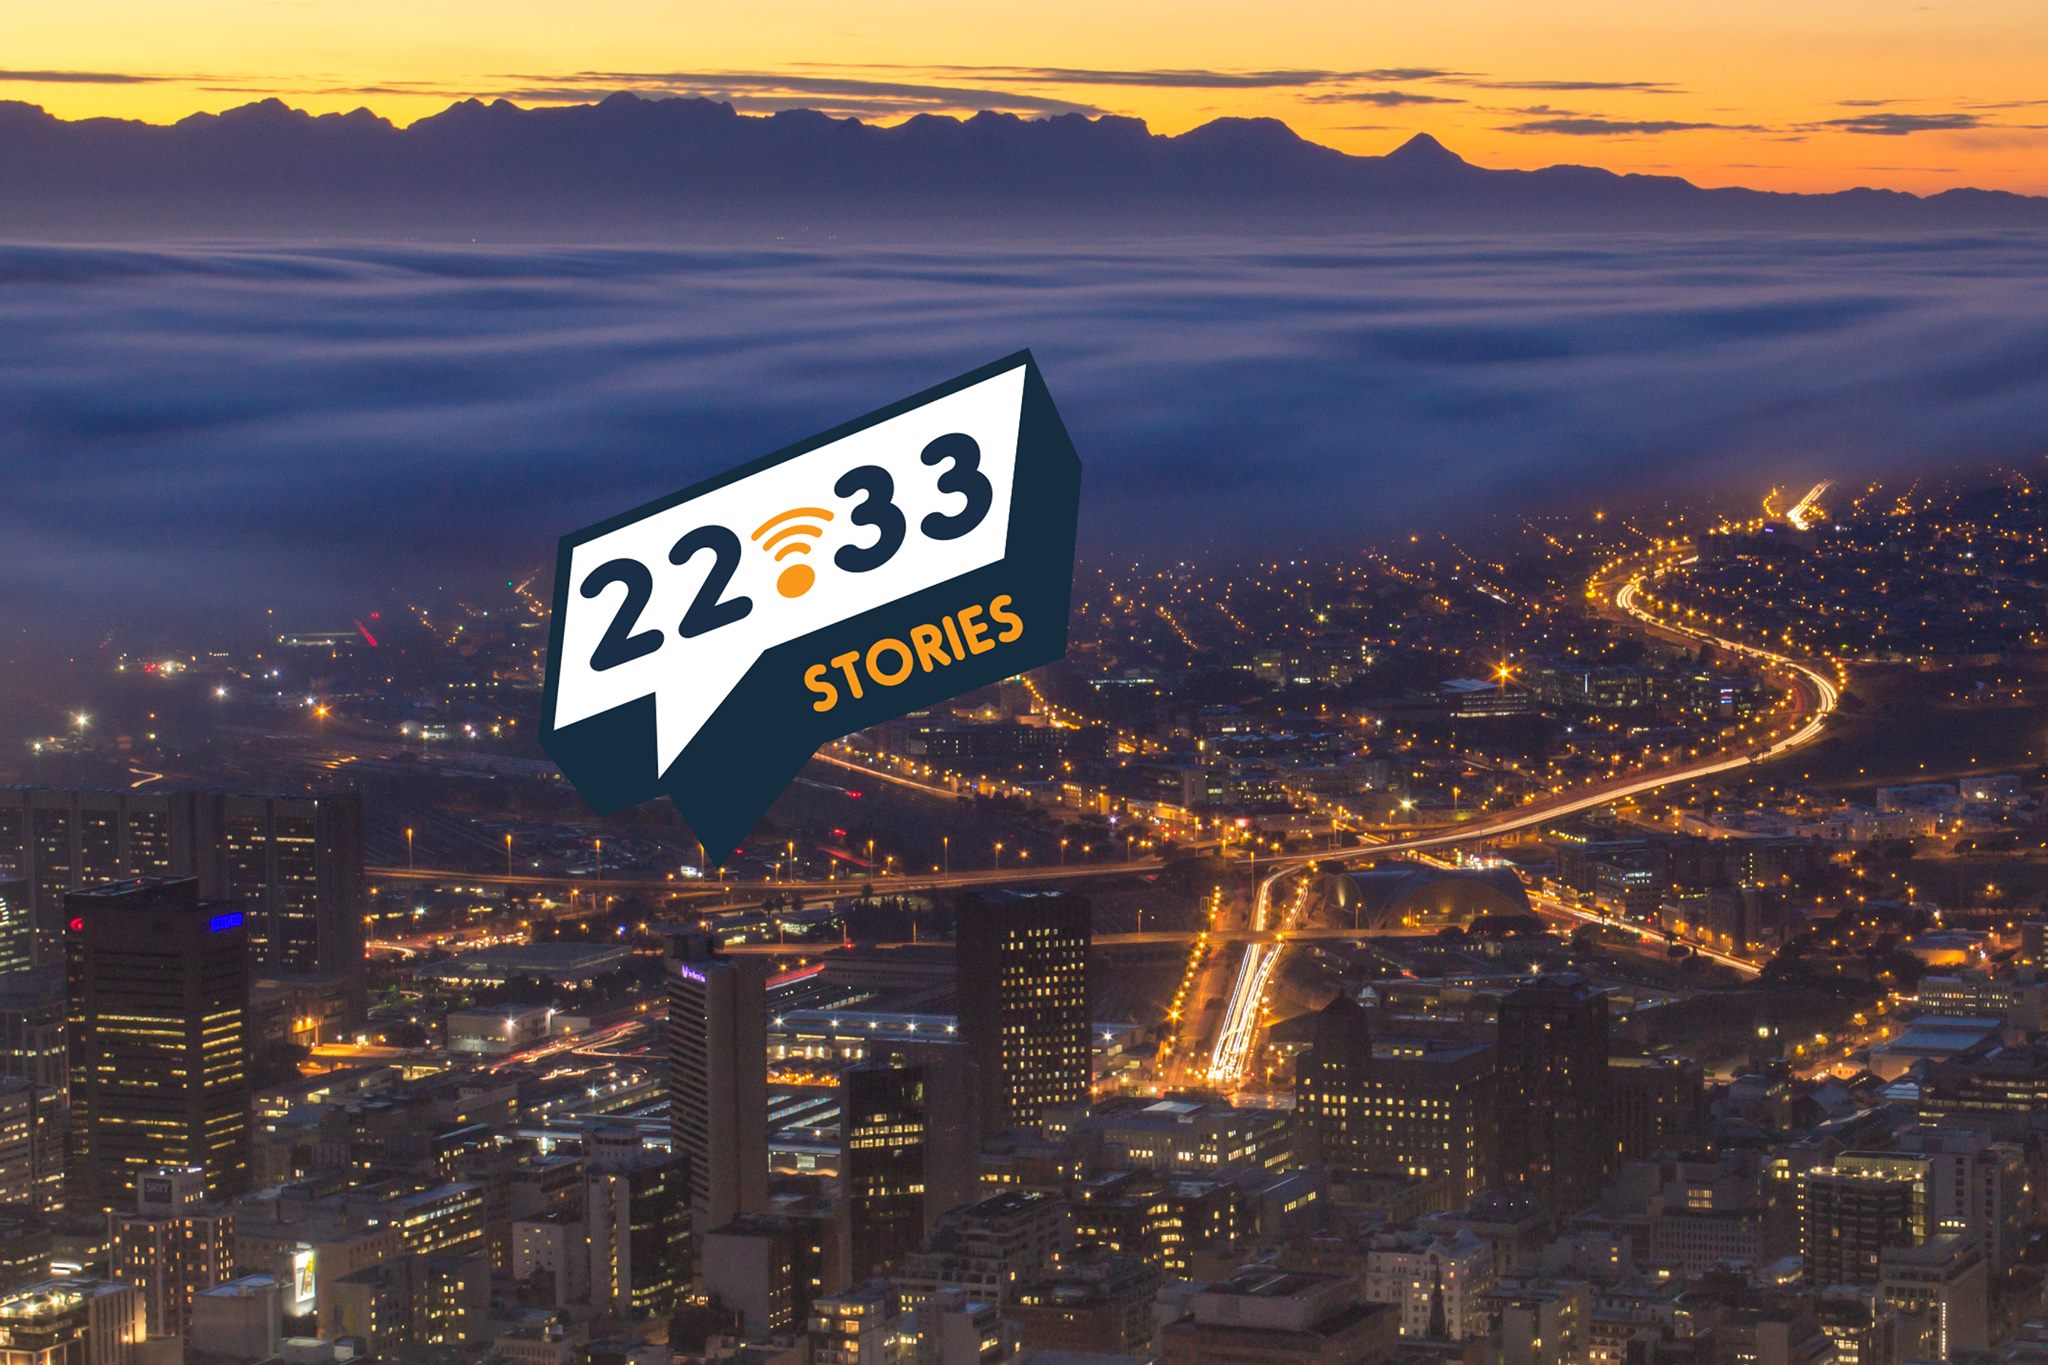 Image for State Department podcast of a city at dusk with a speech bubble that says "22.33" overtop